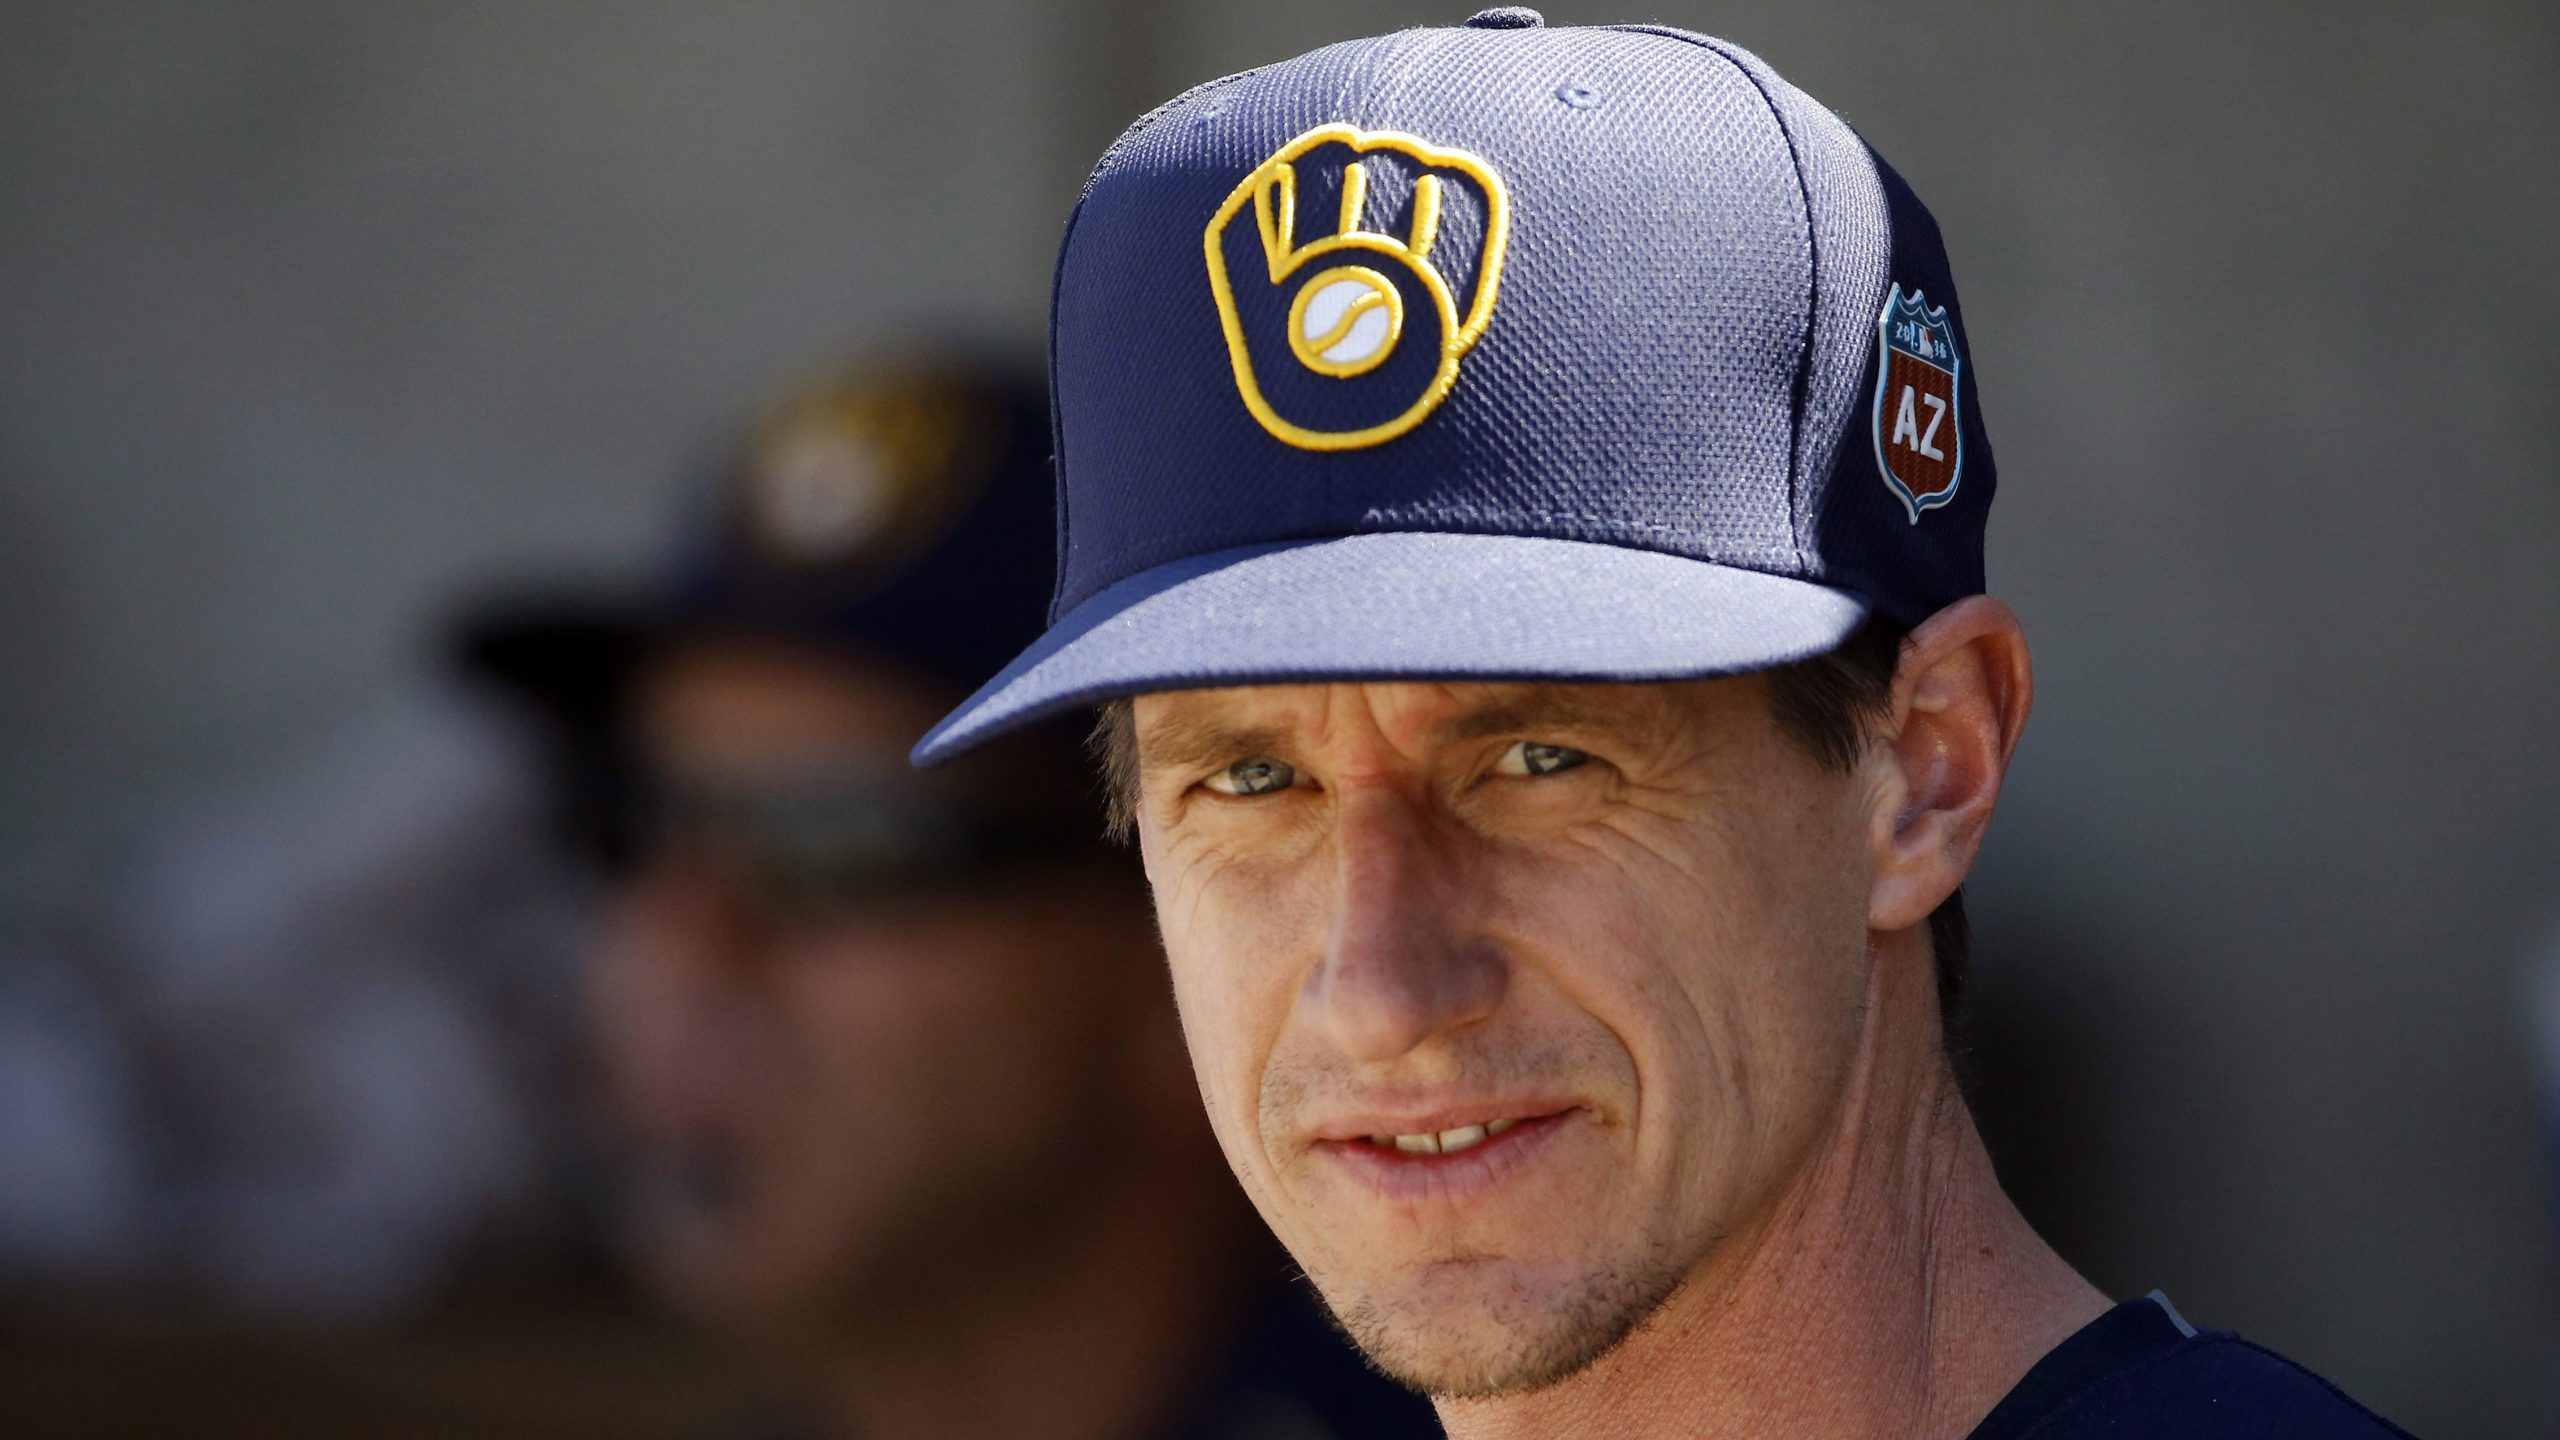 Brewers: Craig Counsell Signs Contract Extension Through 2023